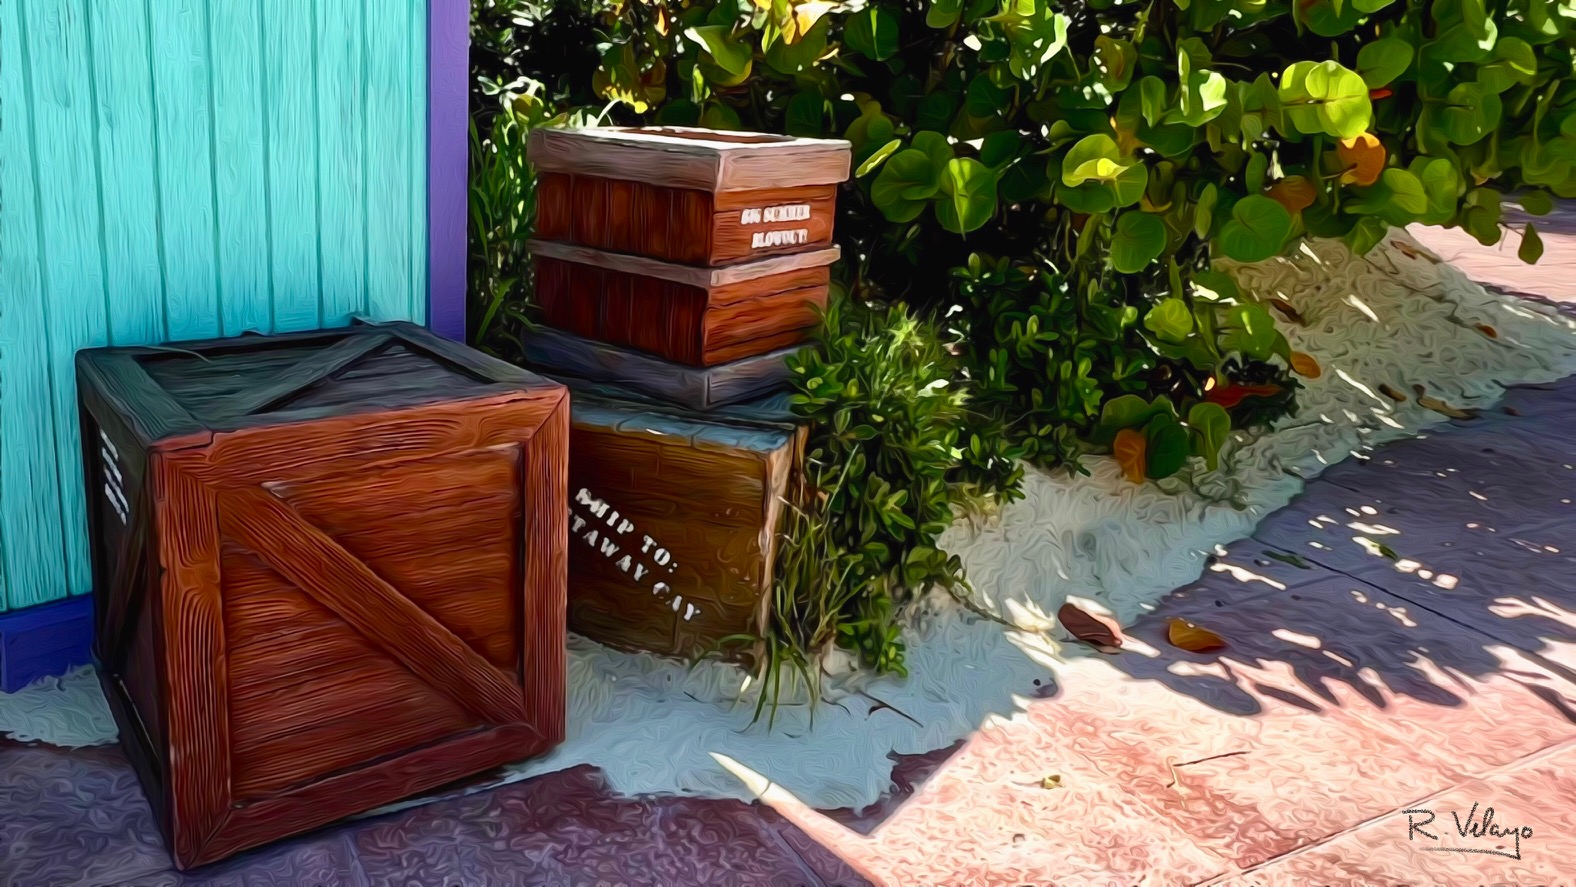 "WOODEN CARGO CRATES AT CASTAWAY CAY" [Created: 6/10/2022]